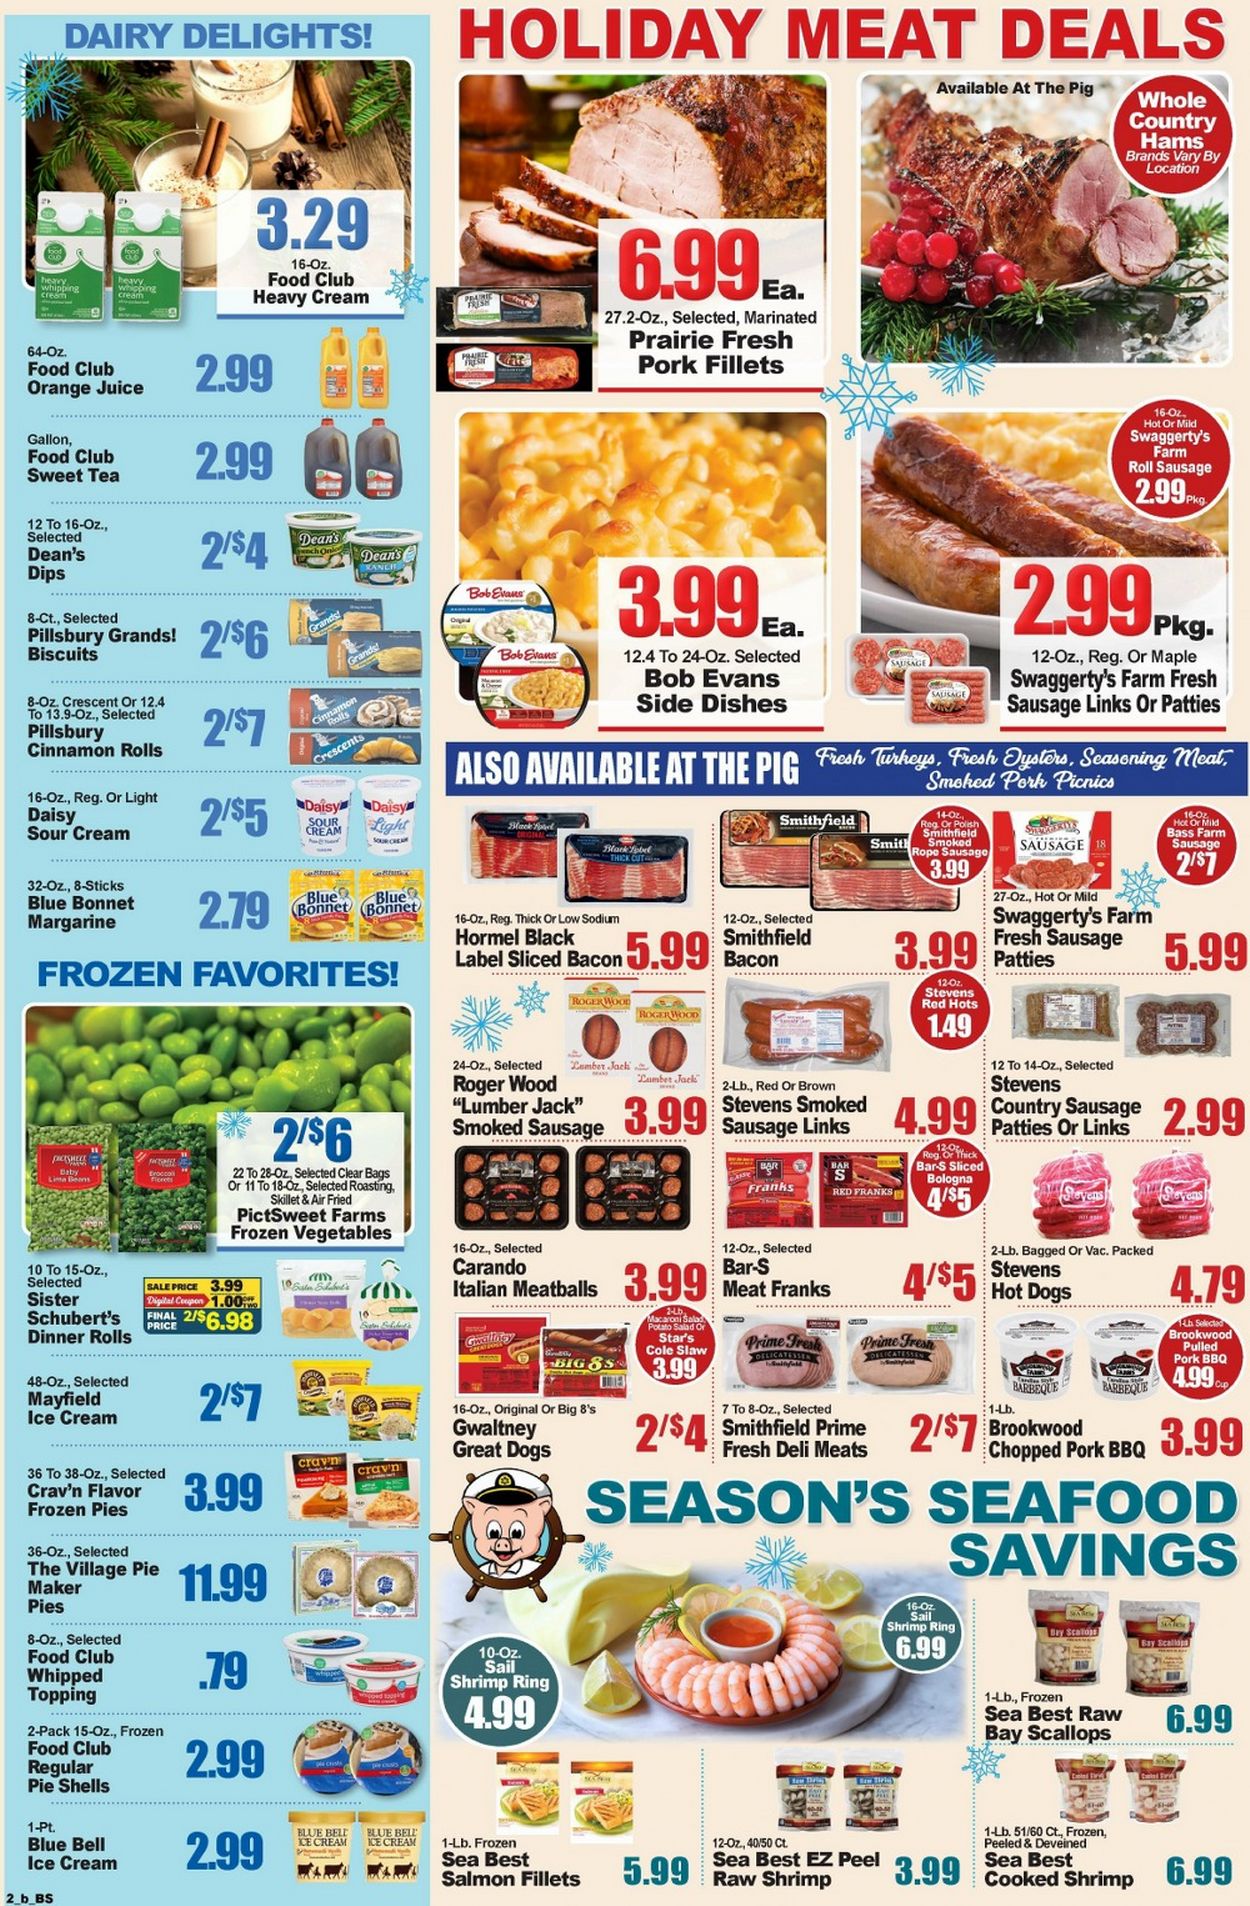 Piggly Wiggly Christmas July 2024 Weekly Sales, Deals, Discounts and Digital Coupons.